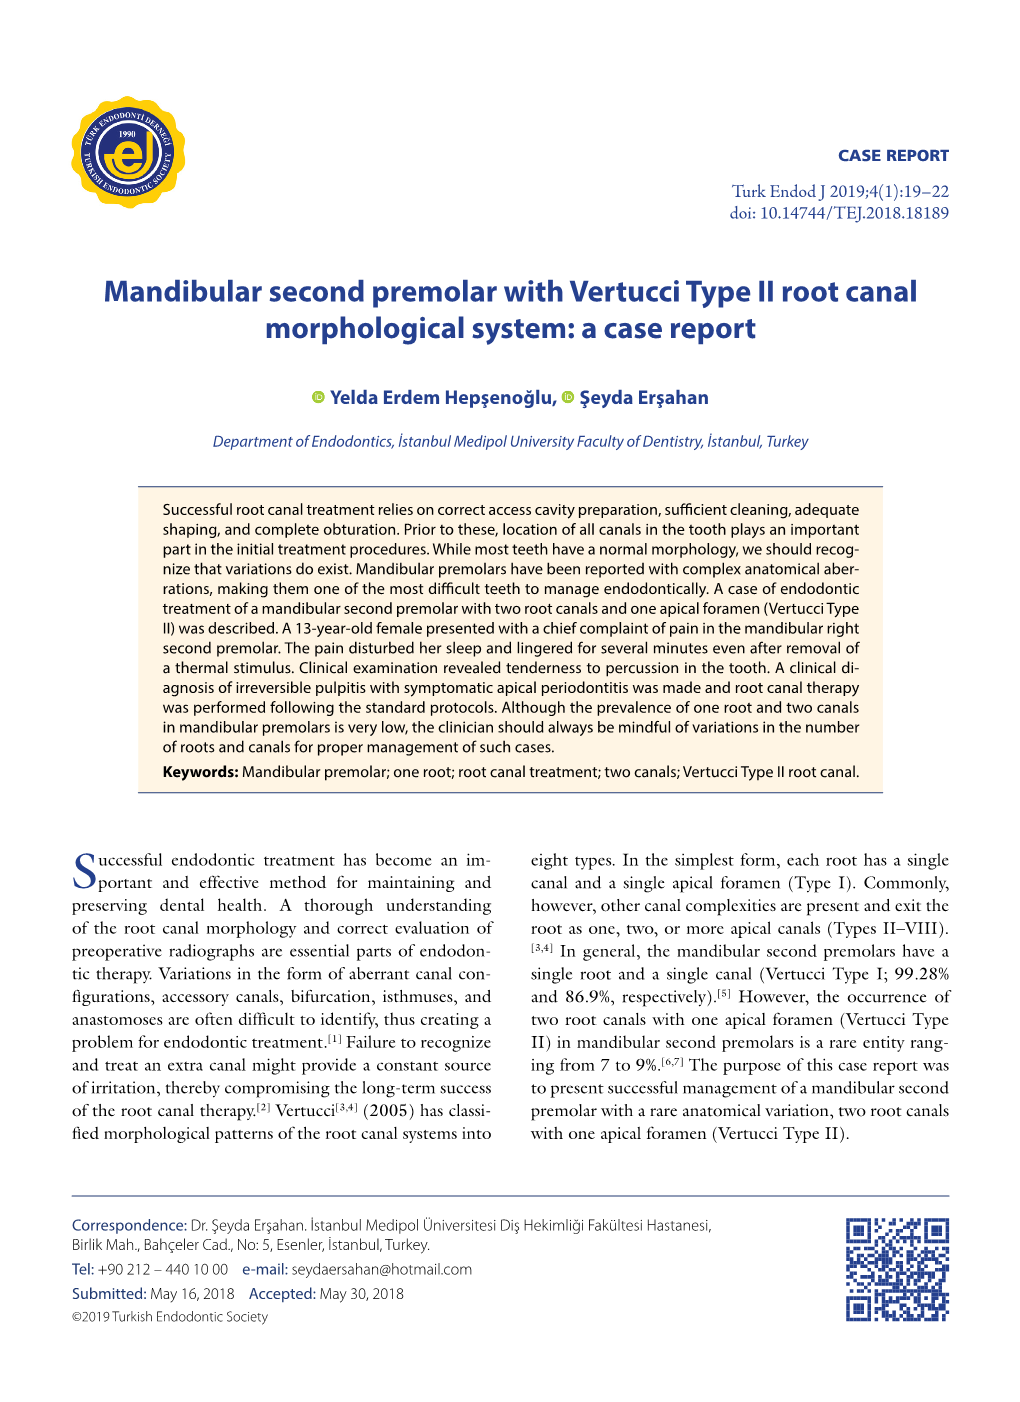 Mandibular Second Premolar with Vertucci Type II Root Canal Morphological System: a Case Report